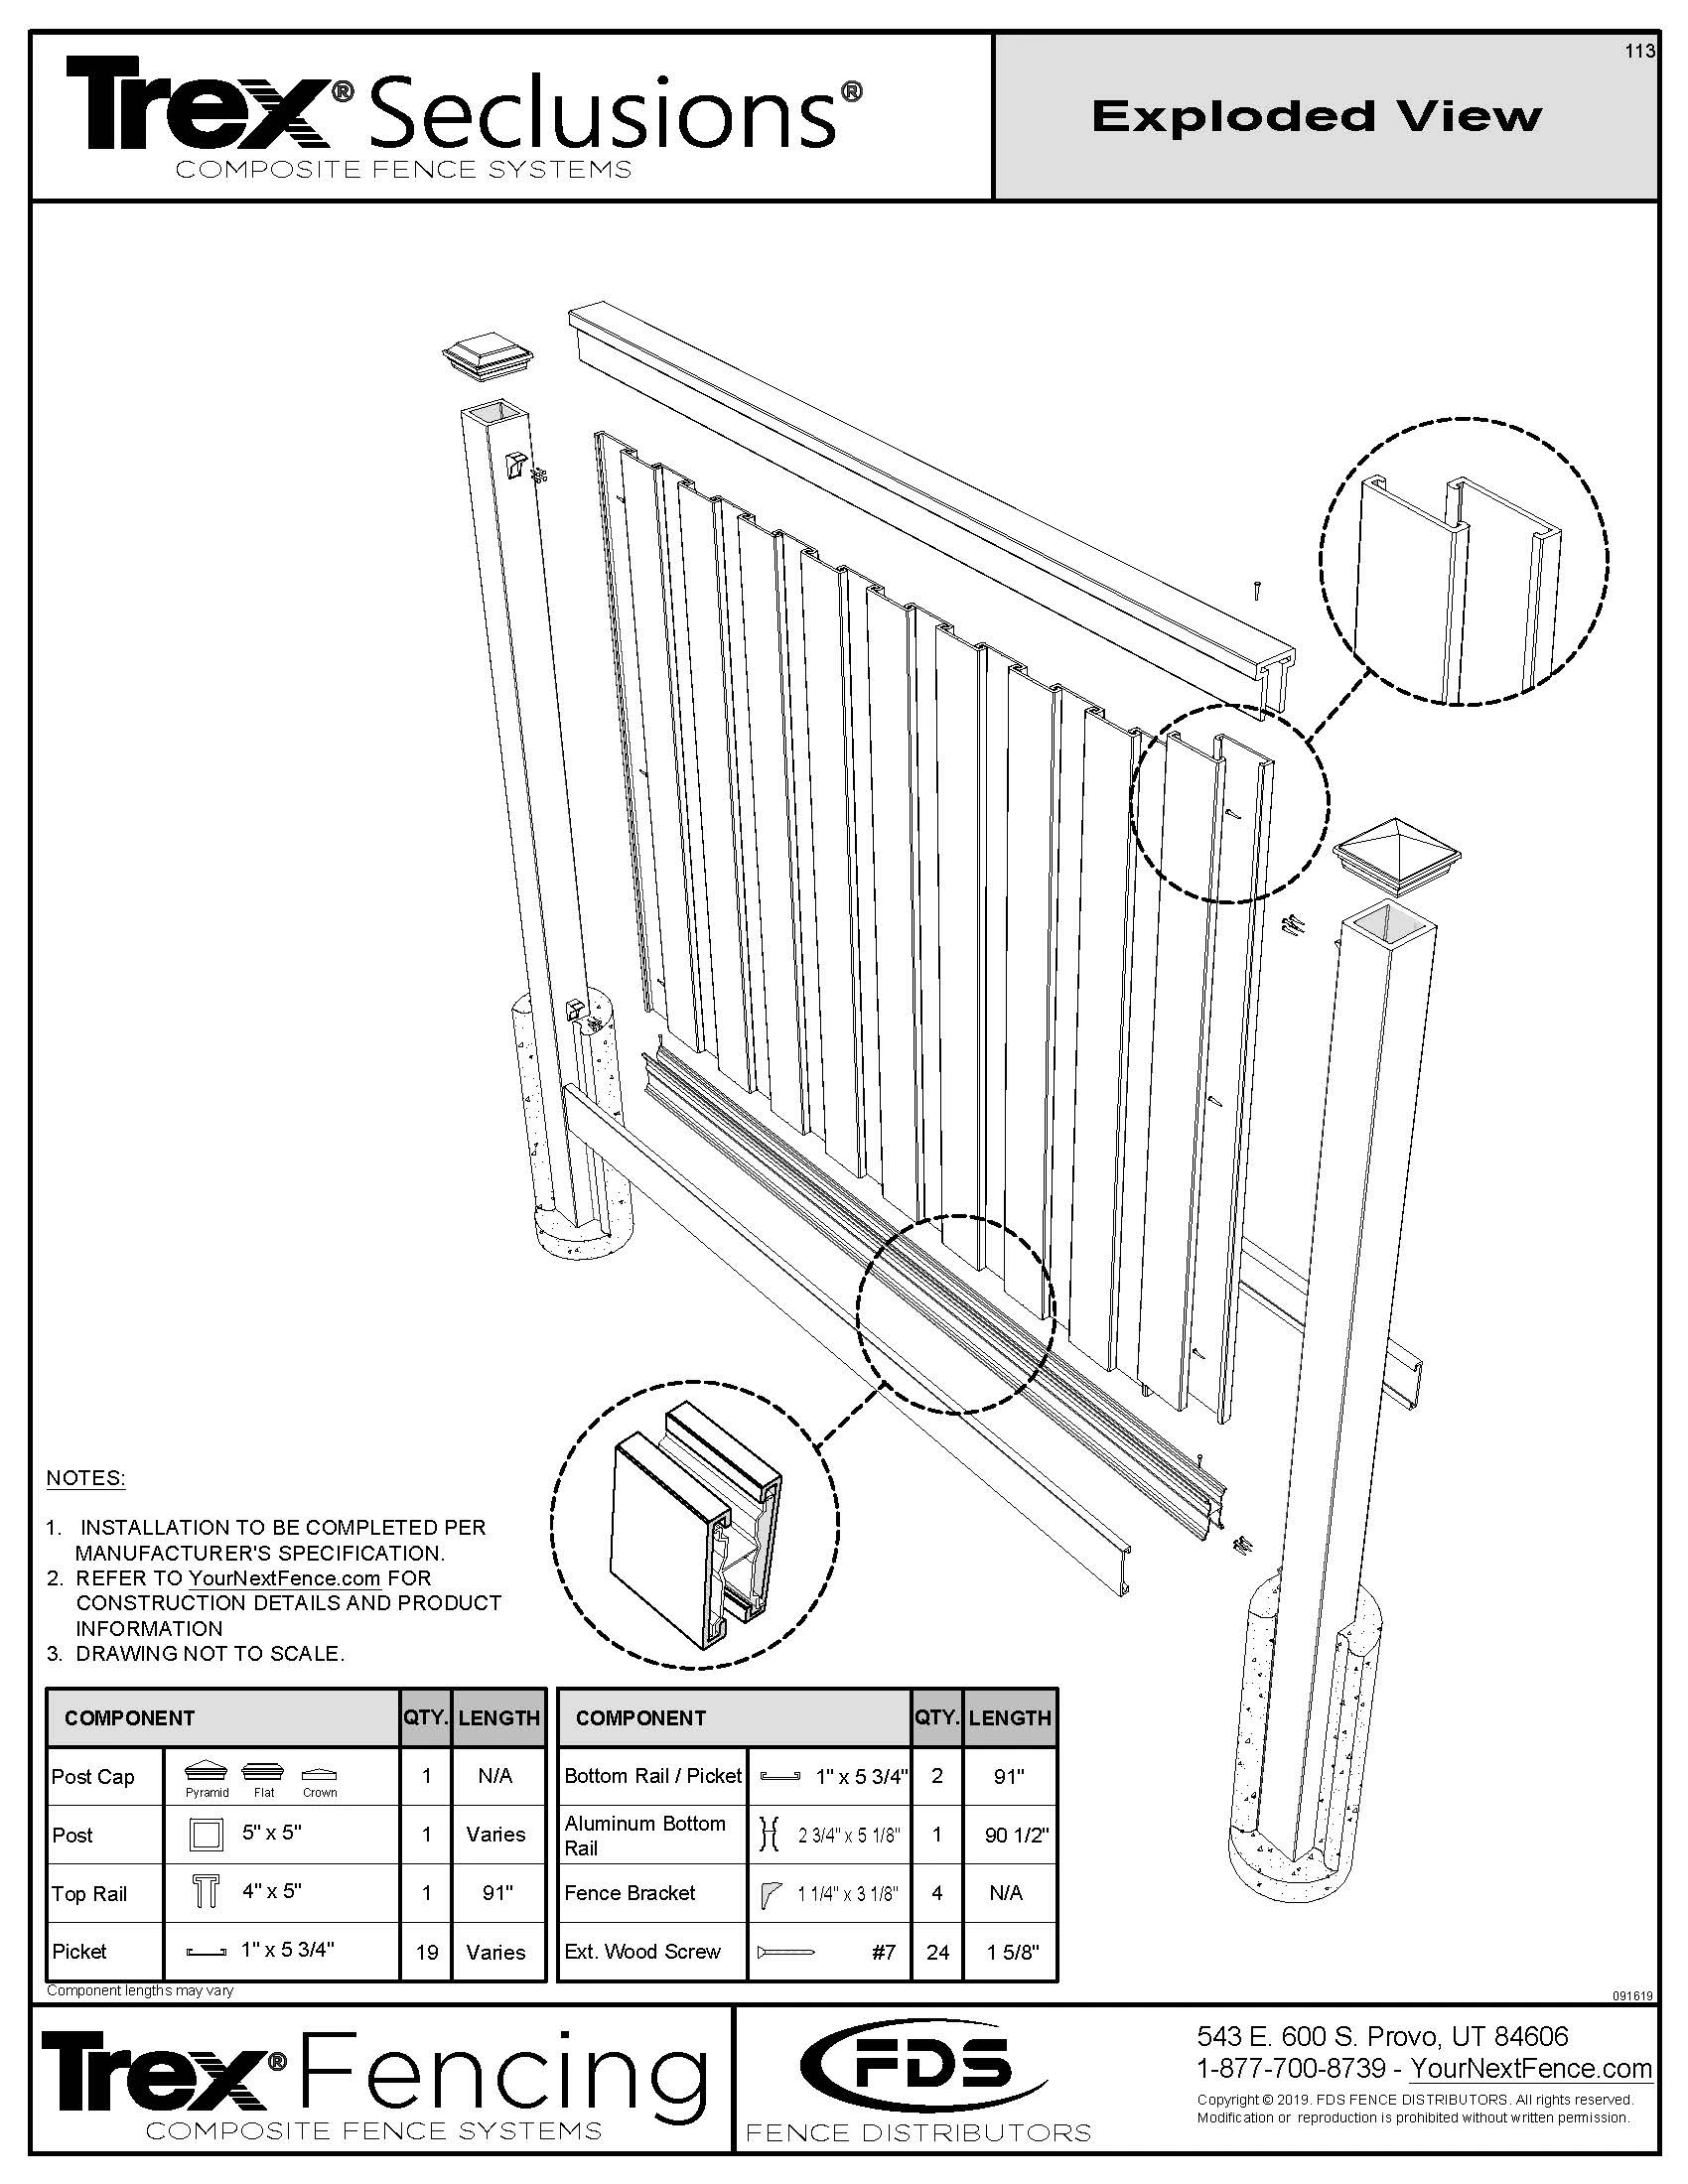 Trex Seclusions Fence Panel Kit - 7-ft. Tall 9